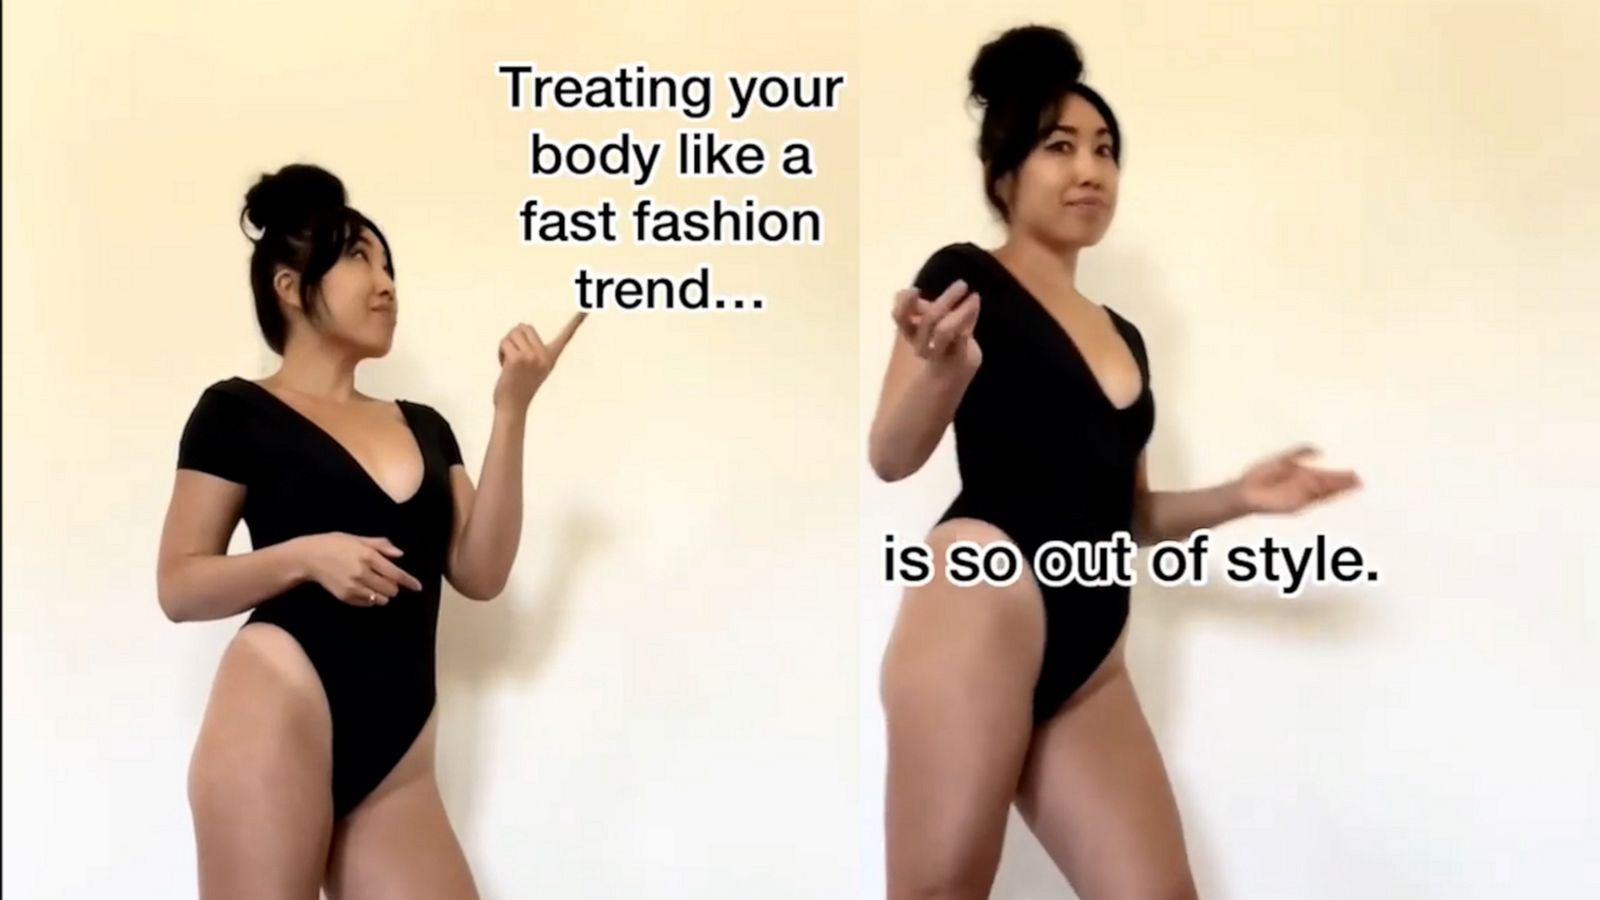 Video Fitness blogger calls out society's obsession with body